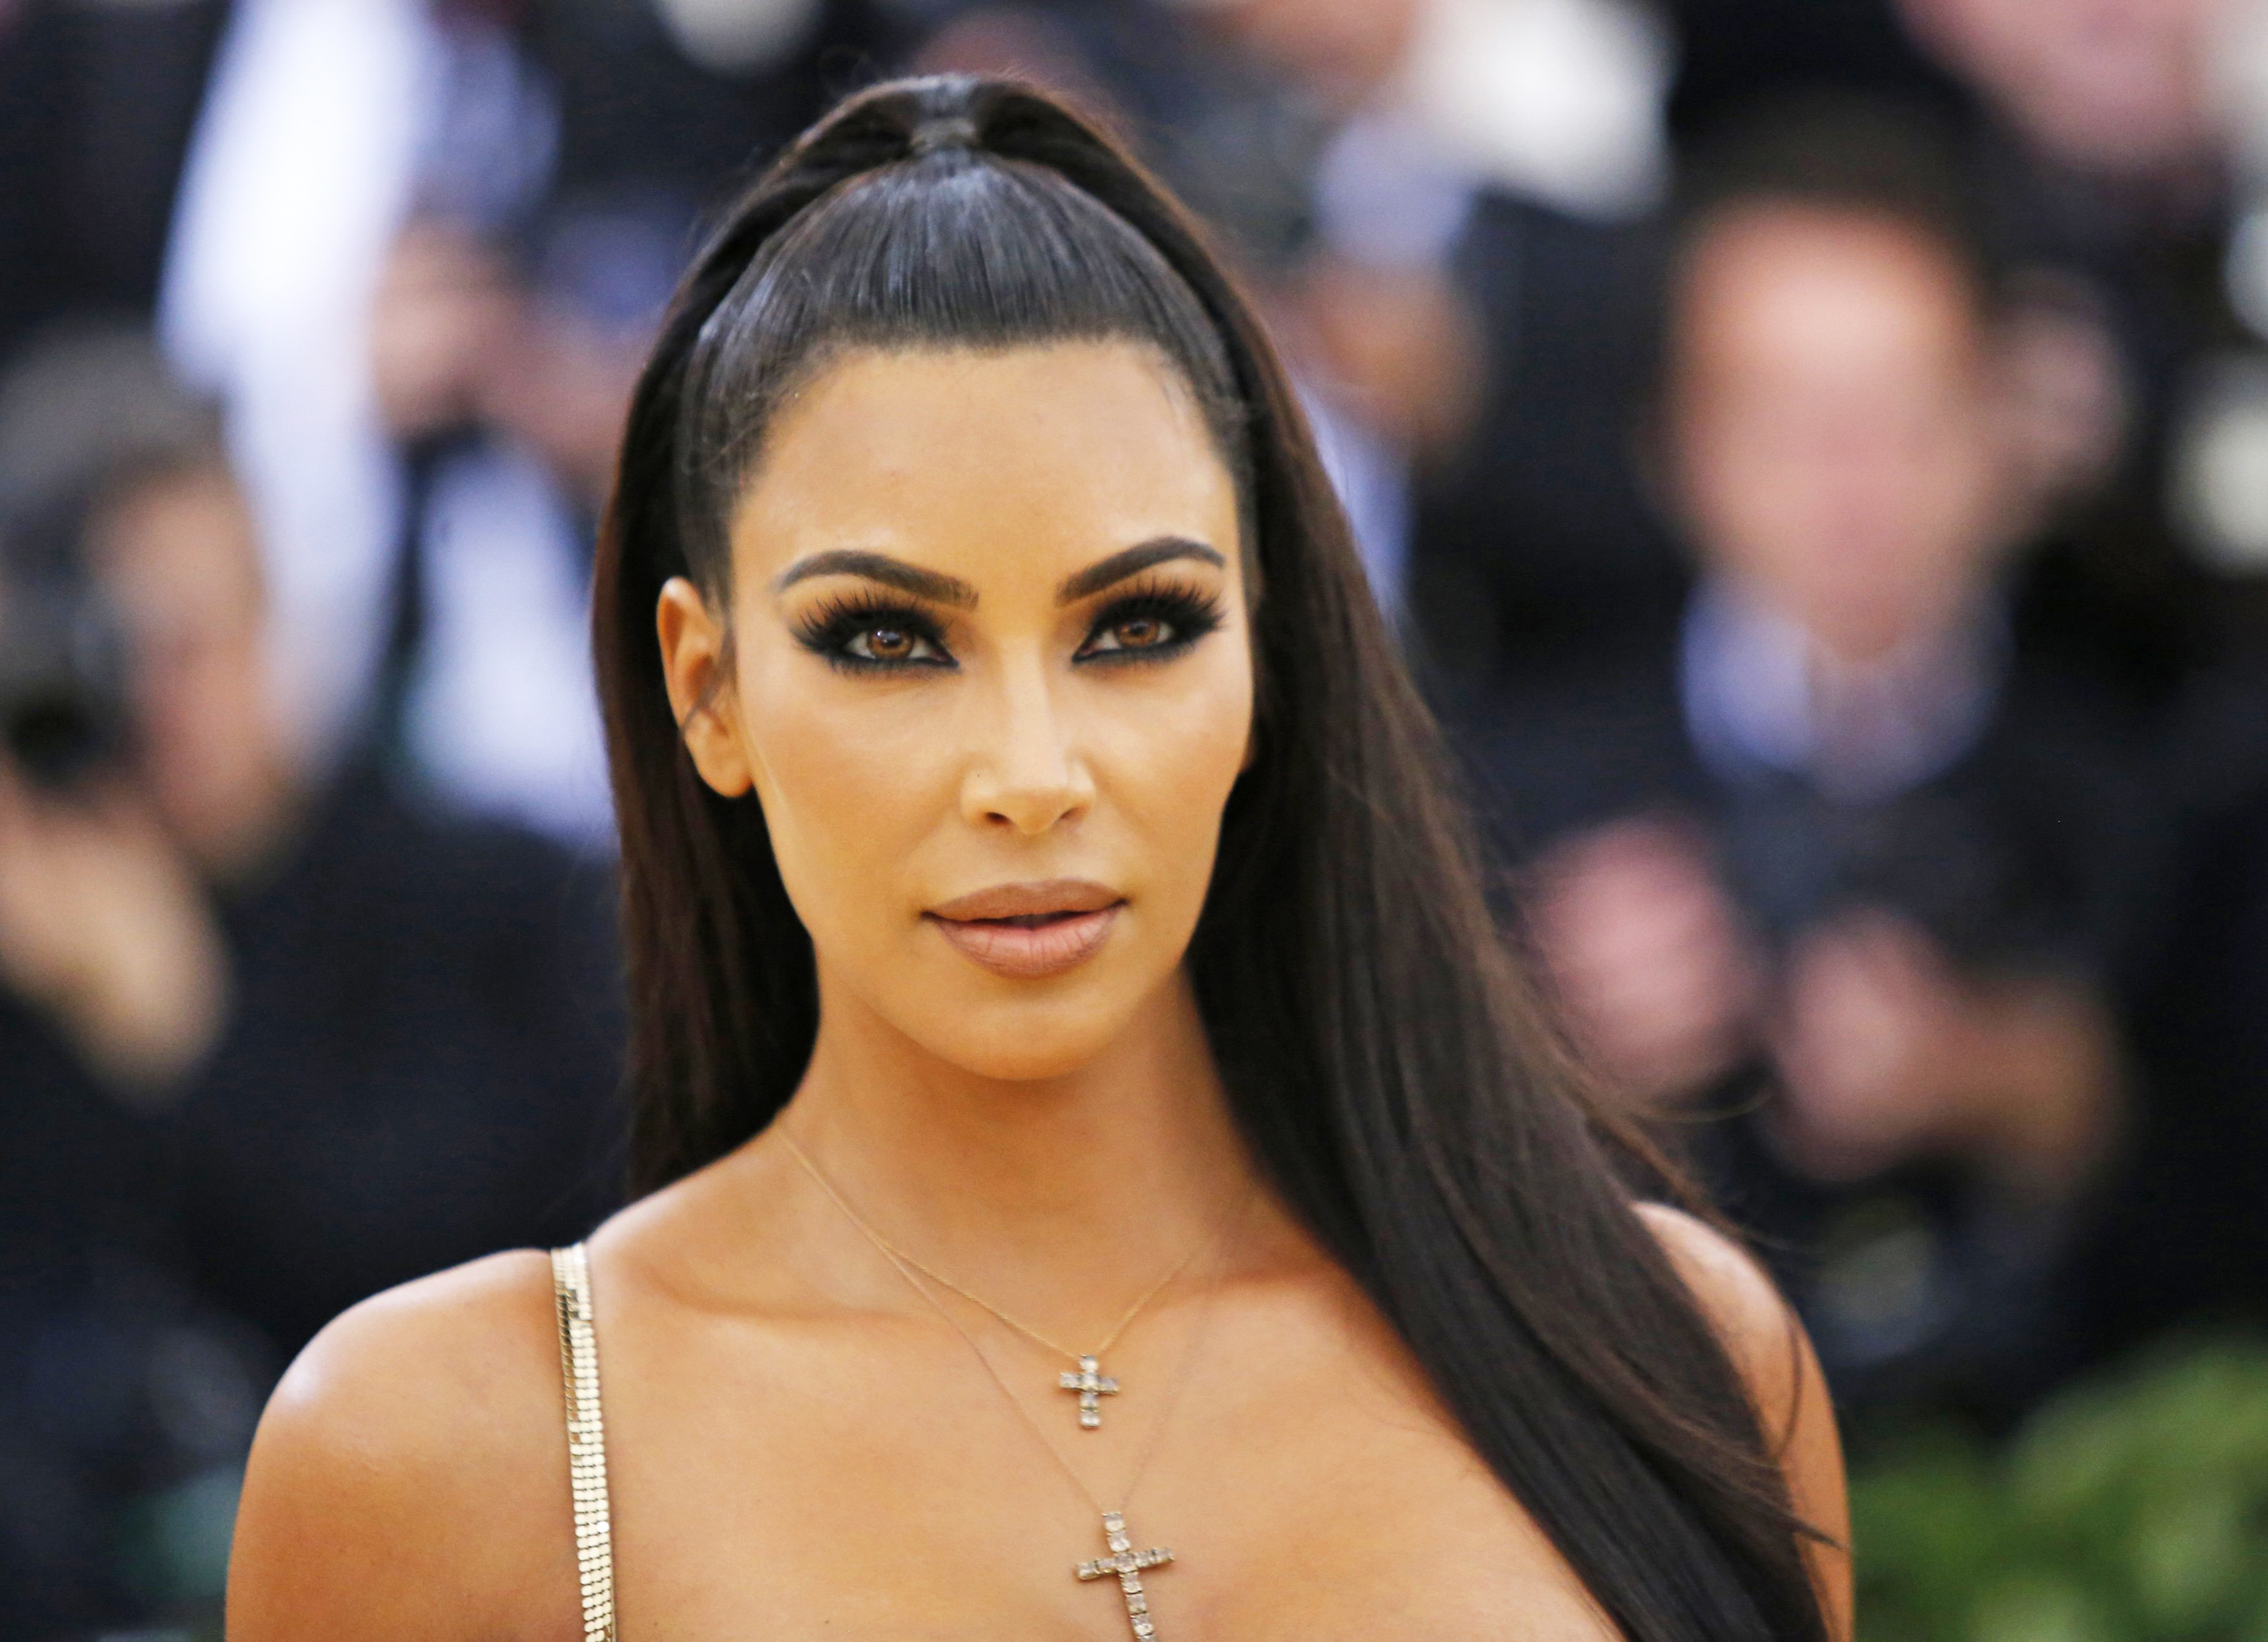 Court grants Kim Kardashian’s request to be legally single